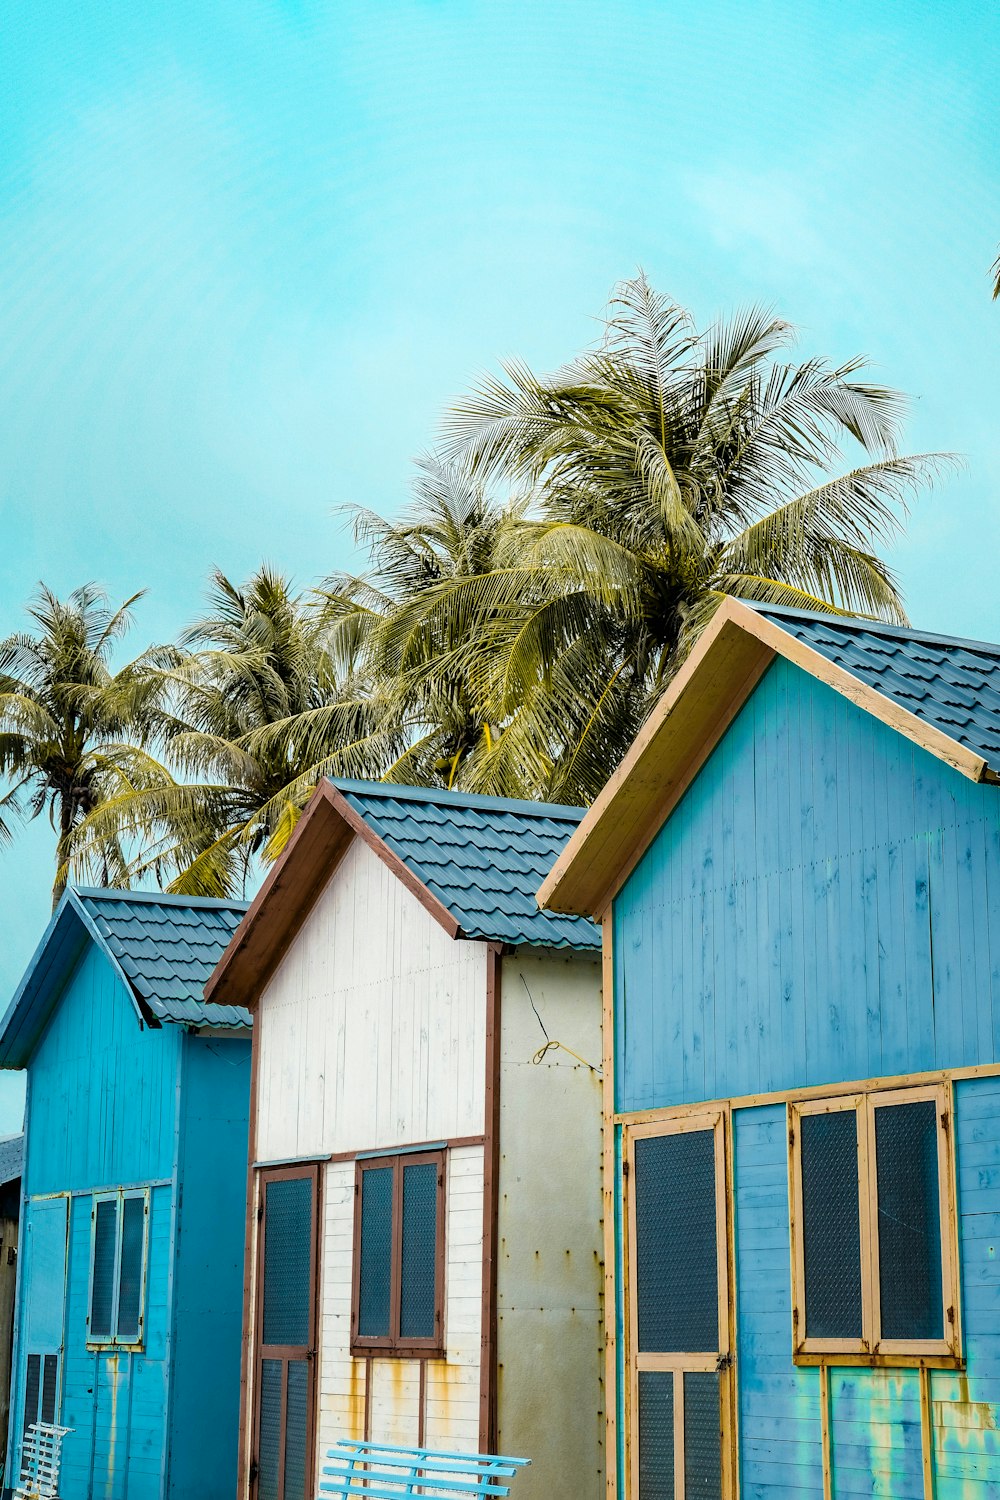 blue and white wooden houses